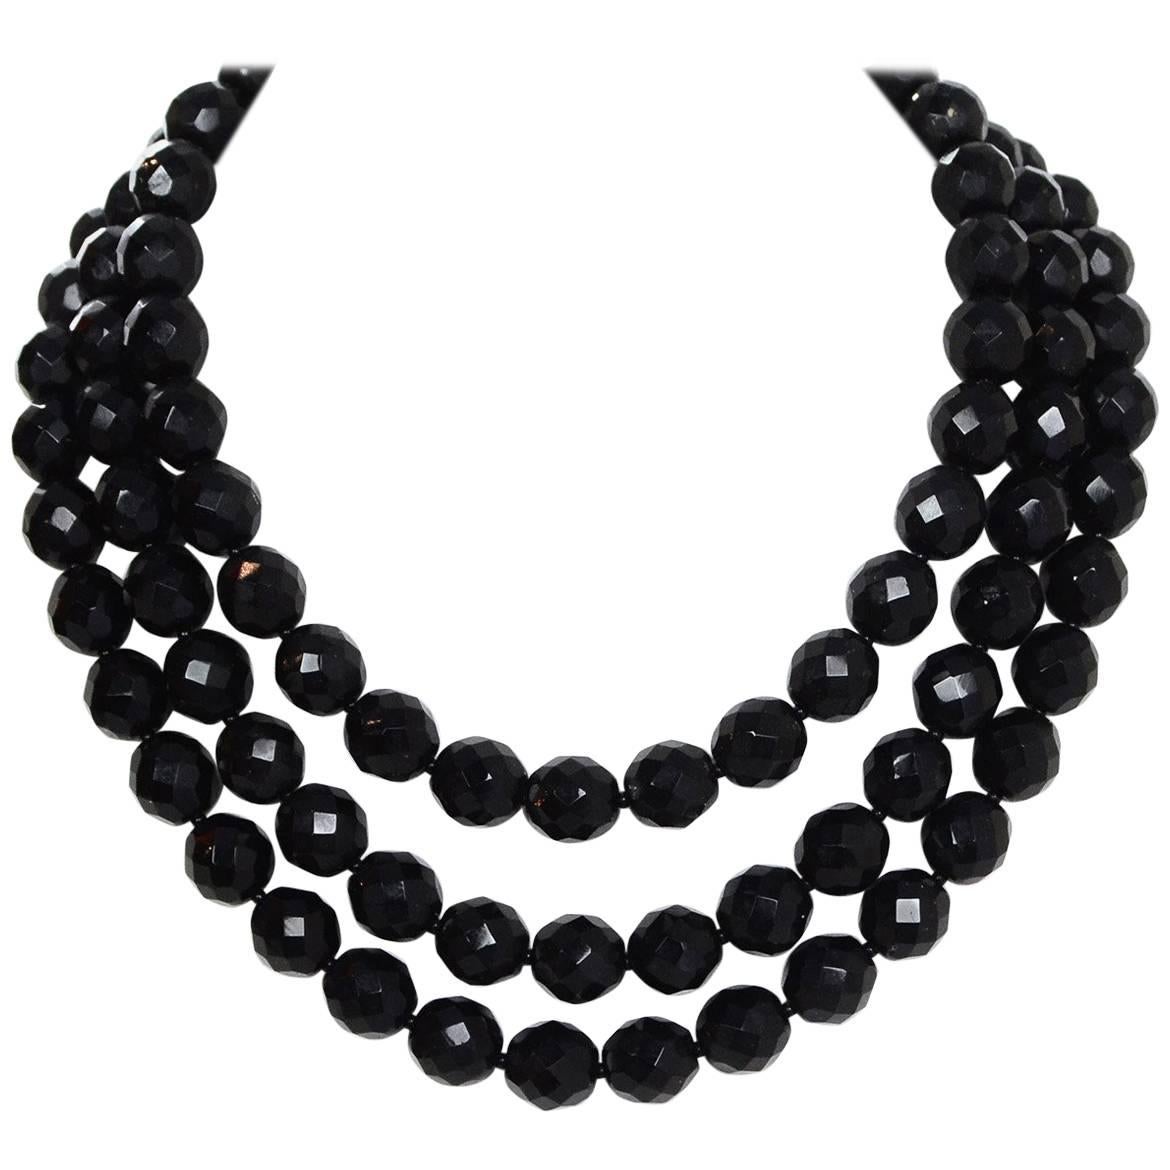 Miriam Haskell Black Beaded Multi-Strand Necklace

Color: Black
Materials: Beads
Closure/Opening: Hook and eye
Stamp: Miriam Haskell
Overall Condition: Excellent pre-owned condition, slight tarnish at closure

Measurements: 
Length: 19"